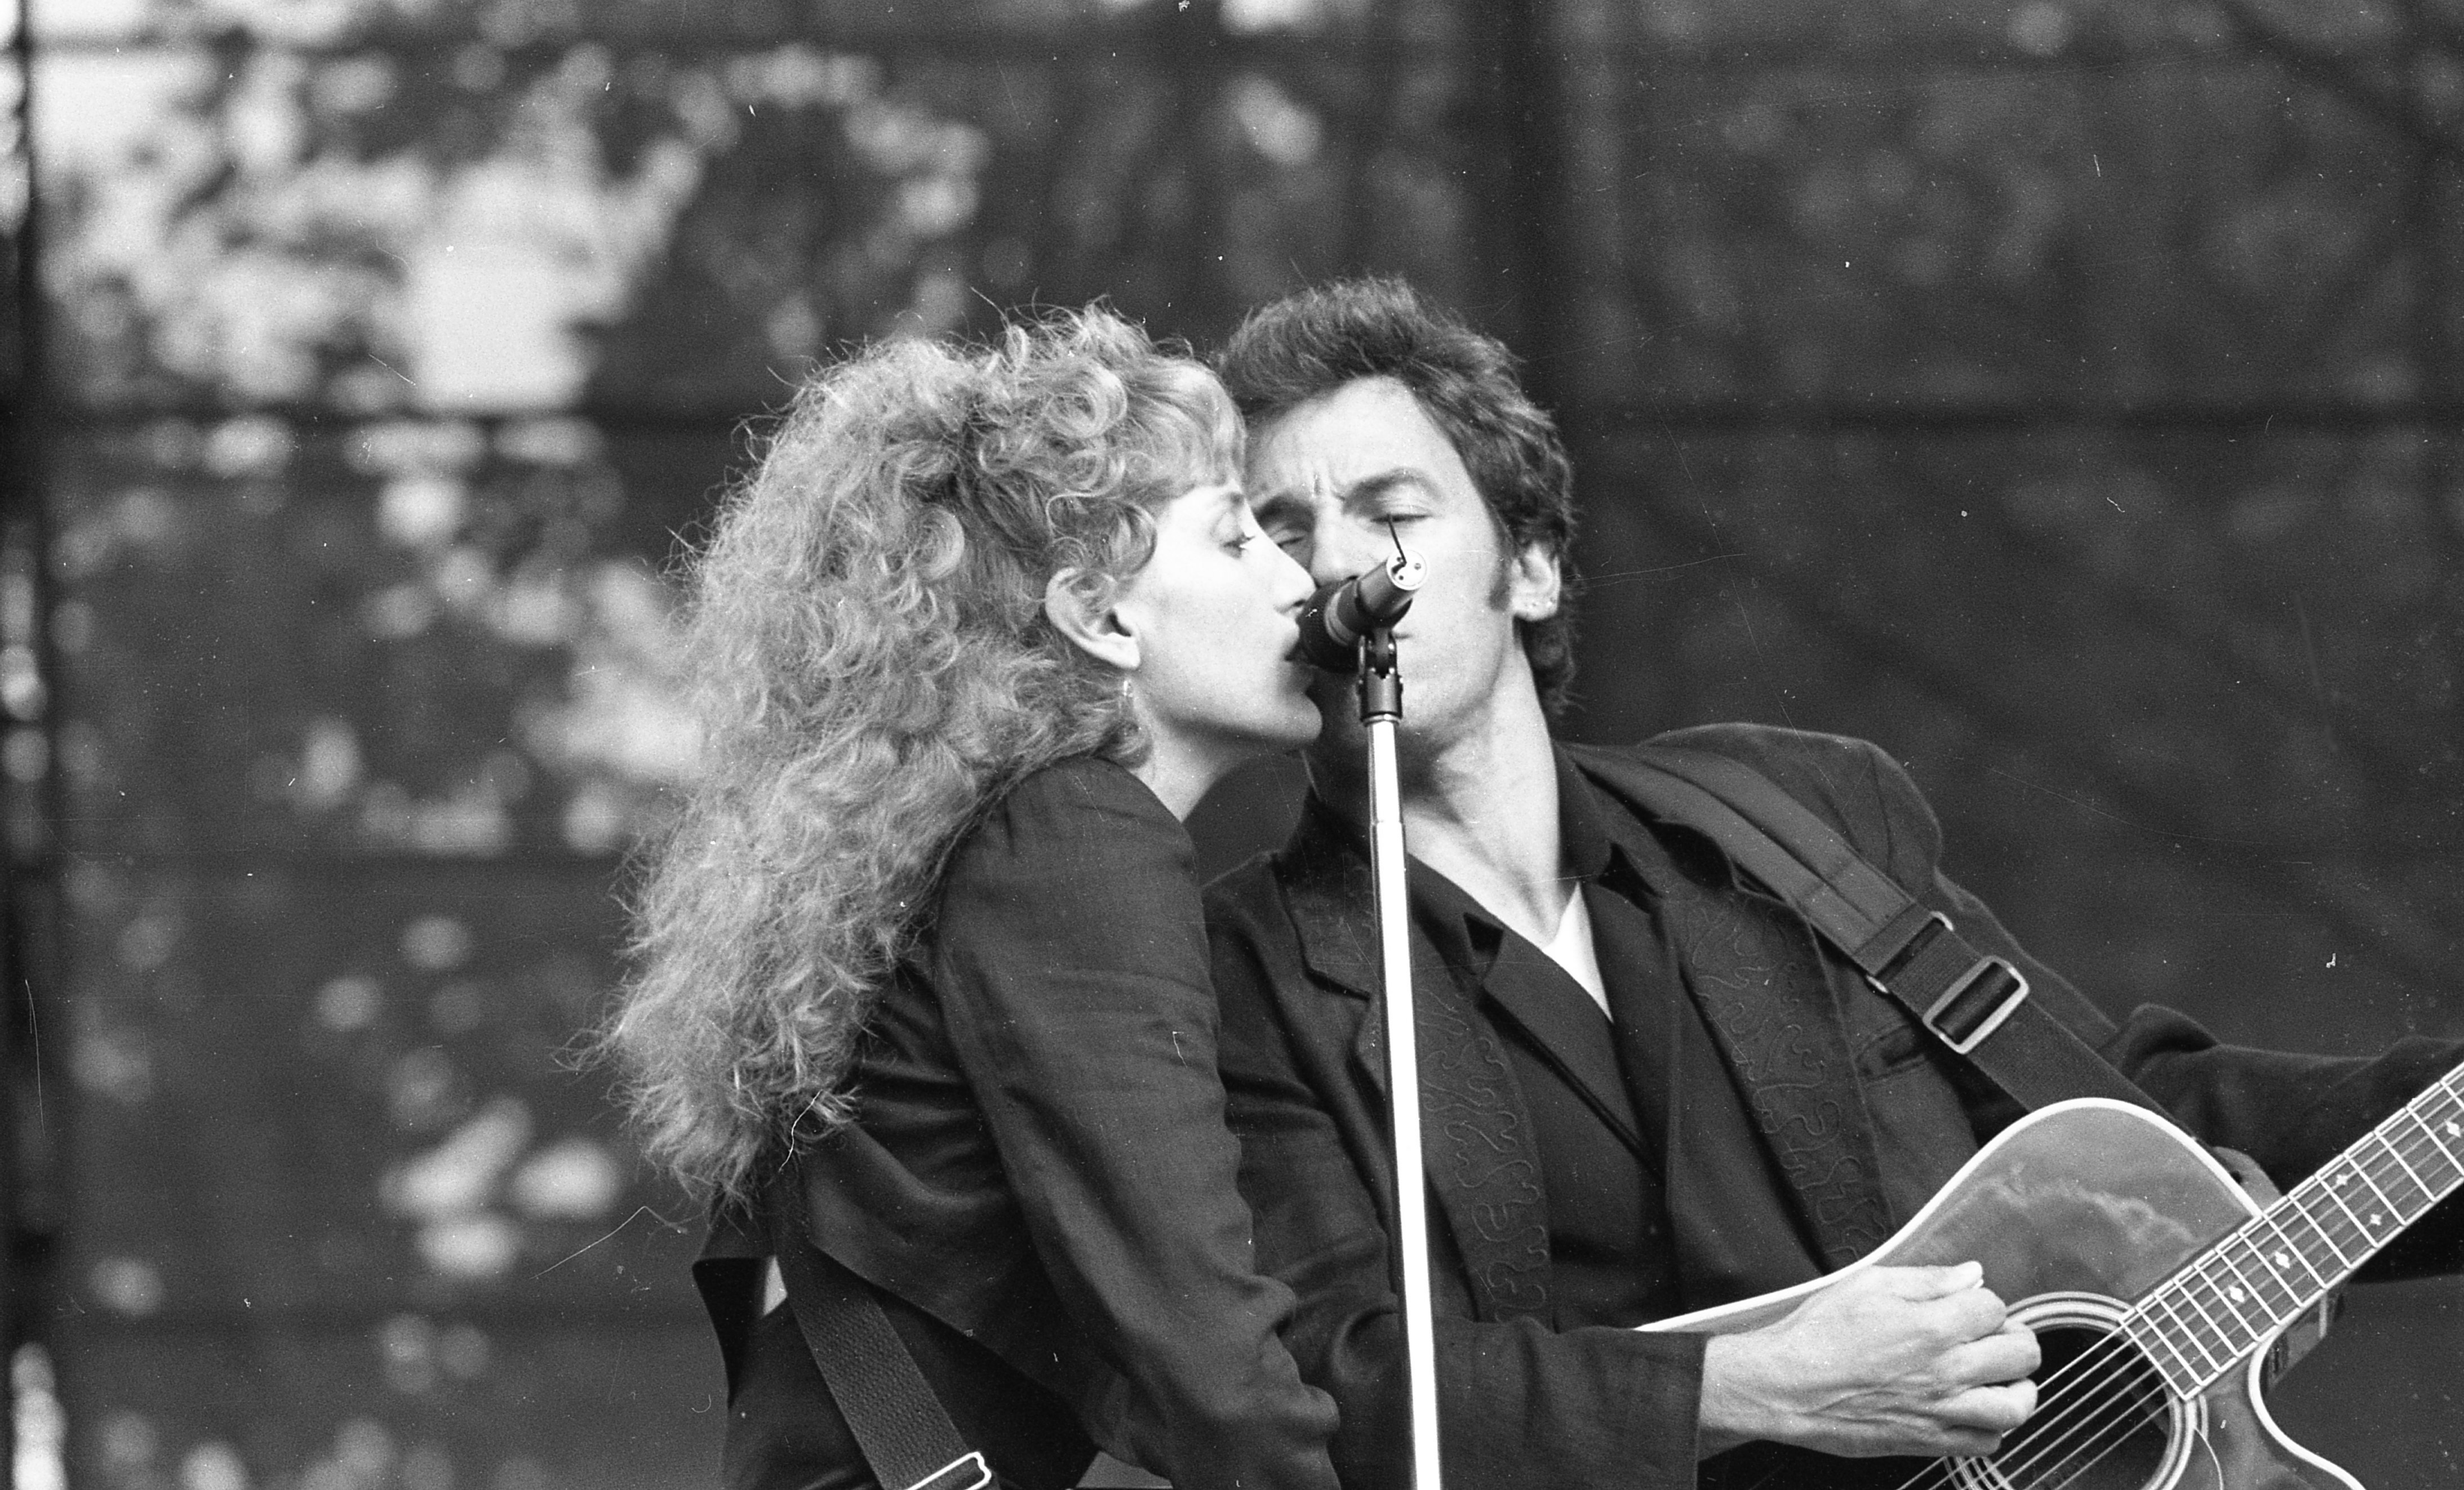 Bruce Springsteen and Patti Scialfa on stage in the RDS, on July 7 1988 | Source: Getty Images